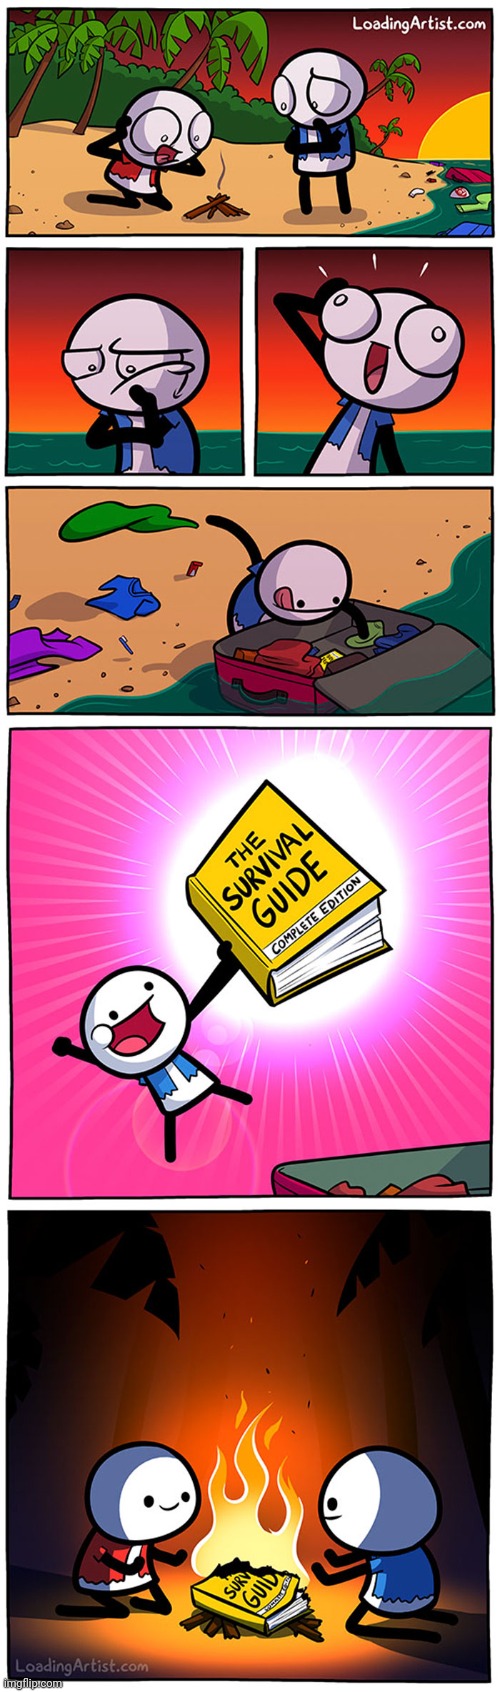 Survival Guide | image tagged in loading artist,survival guide,survival,stranded,comics,comics/cartoons | made w/ Imgflip meme maker